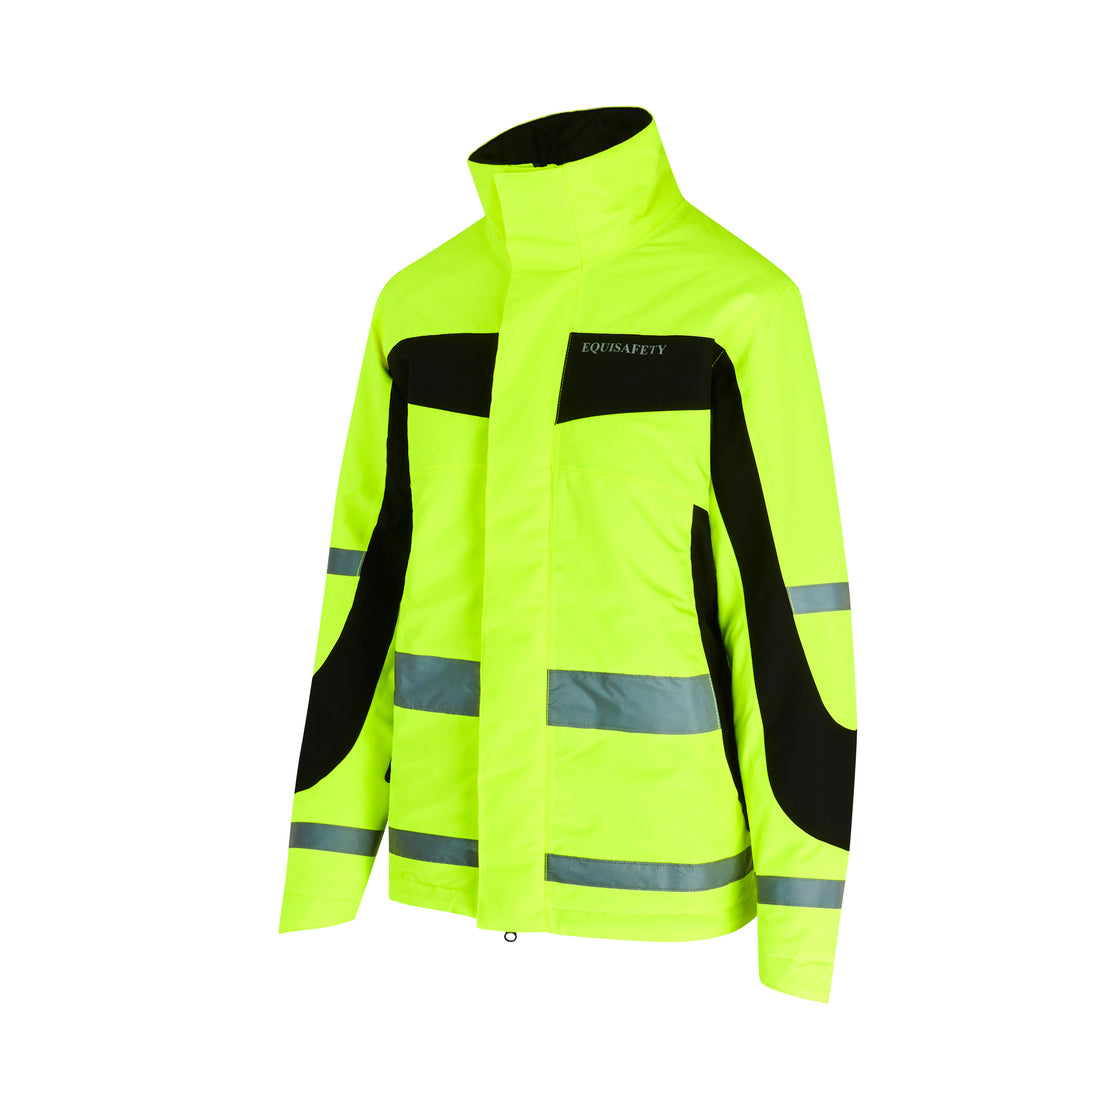 Equisafety Hi Vis Winter Inverno Equestrian Riding Jacket - Yellow